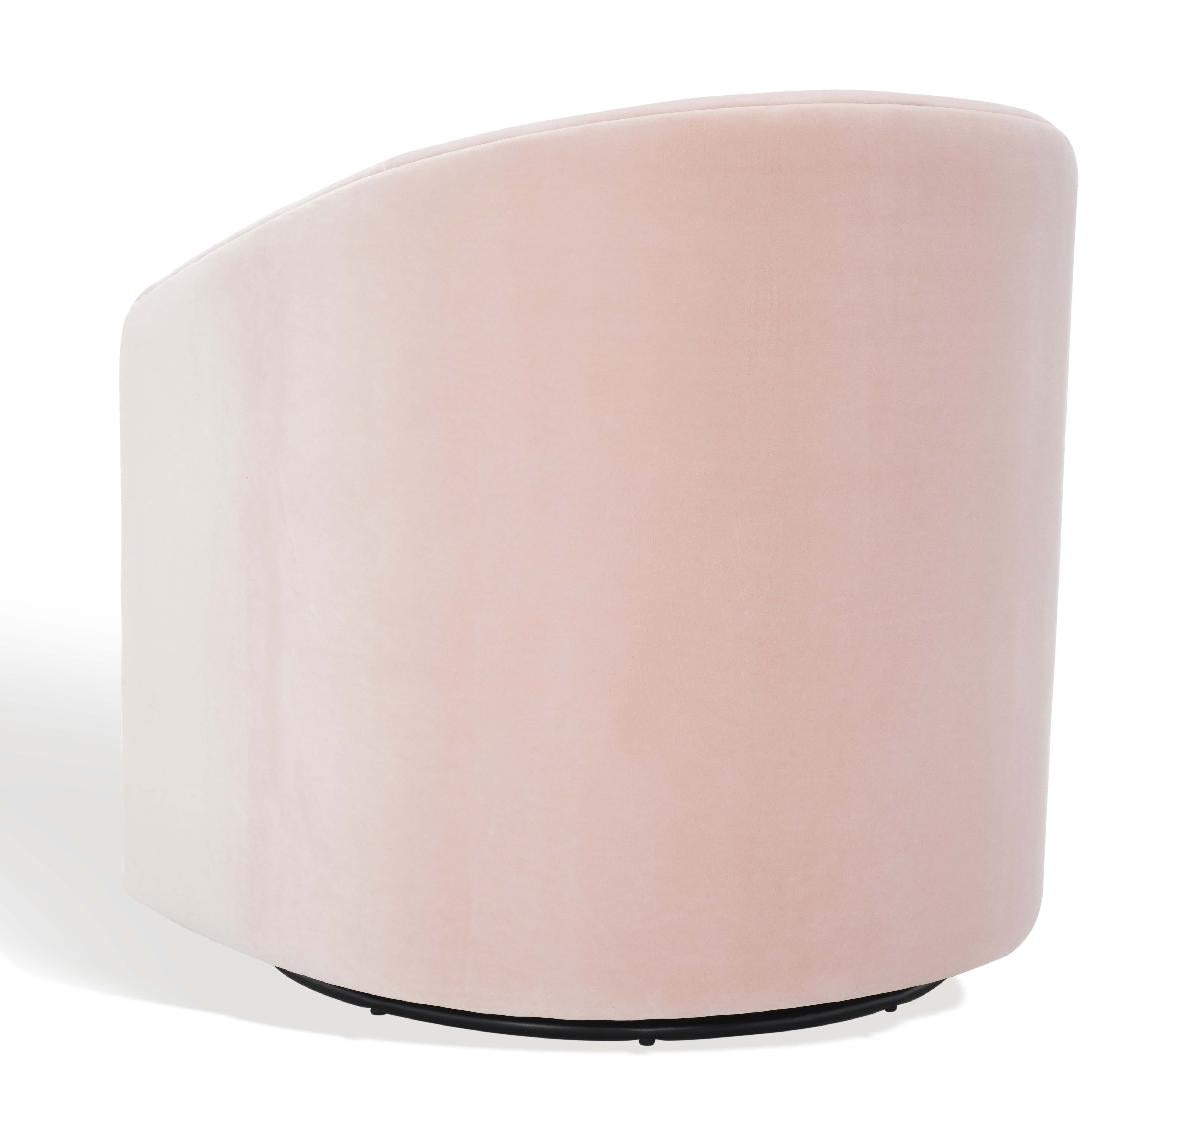 Safavieh Couture Lesley Swivel Barrel Chair - Light Pink